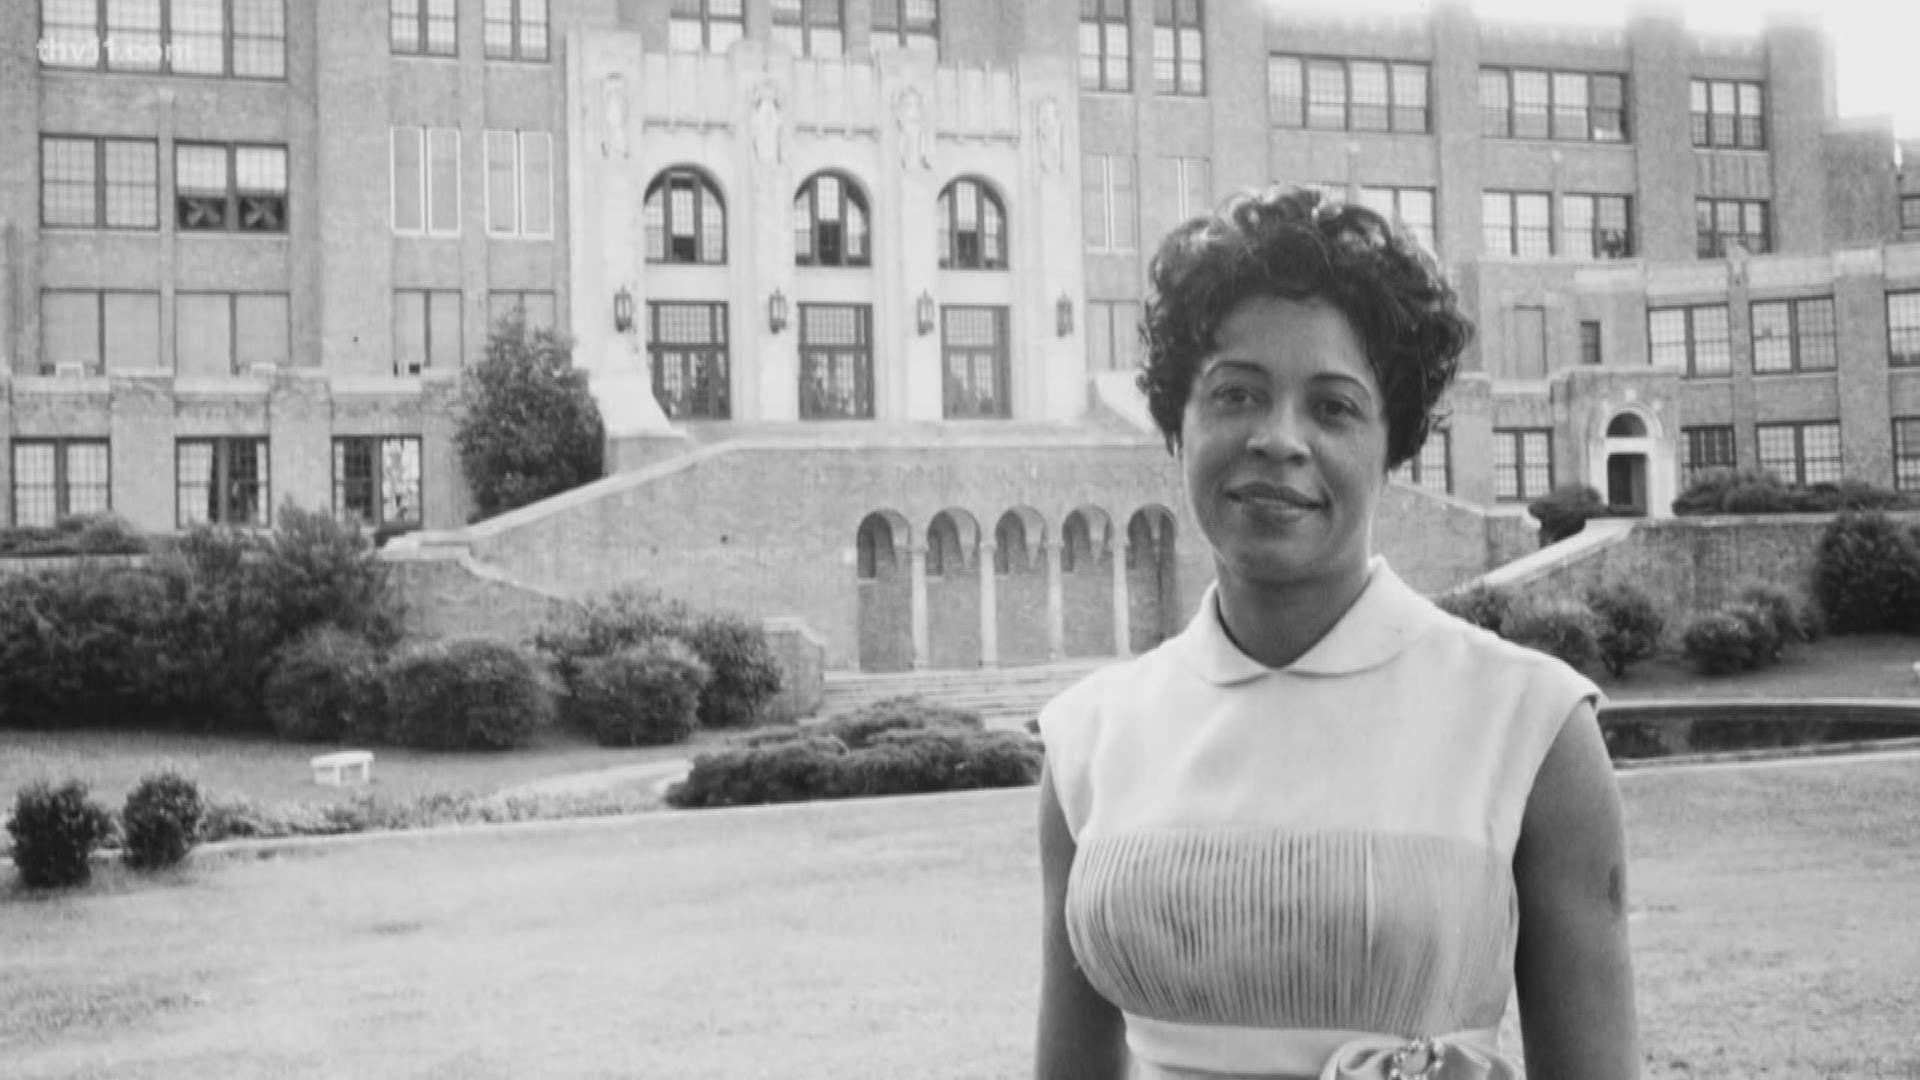 Monday was both Presidents Day and Daisy Gatson Bates Day.